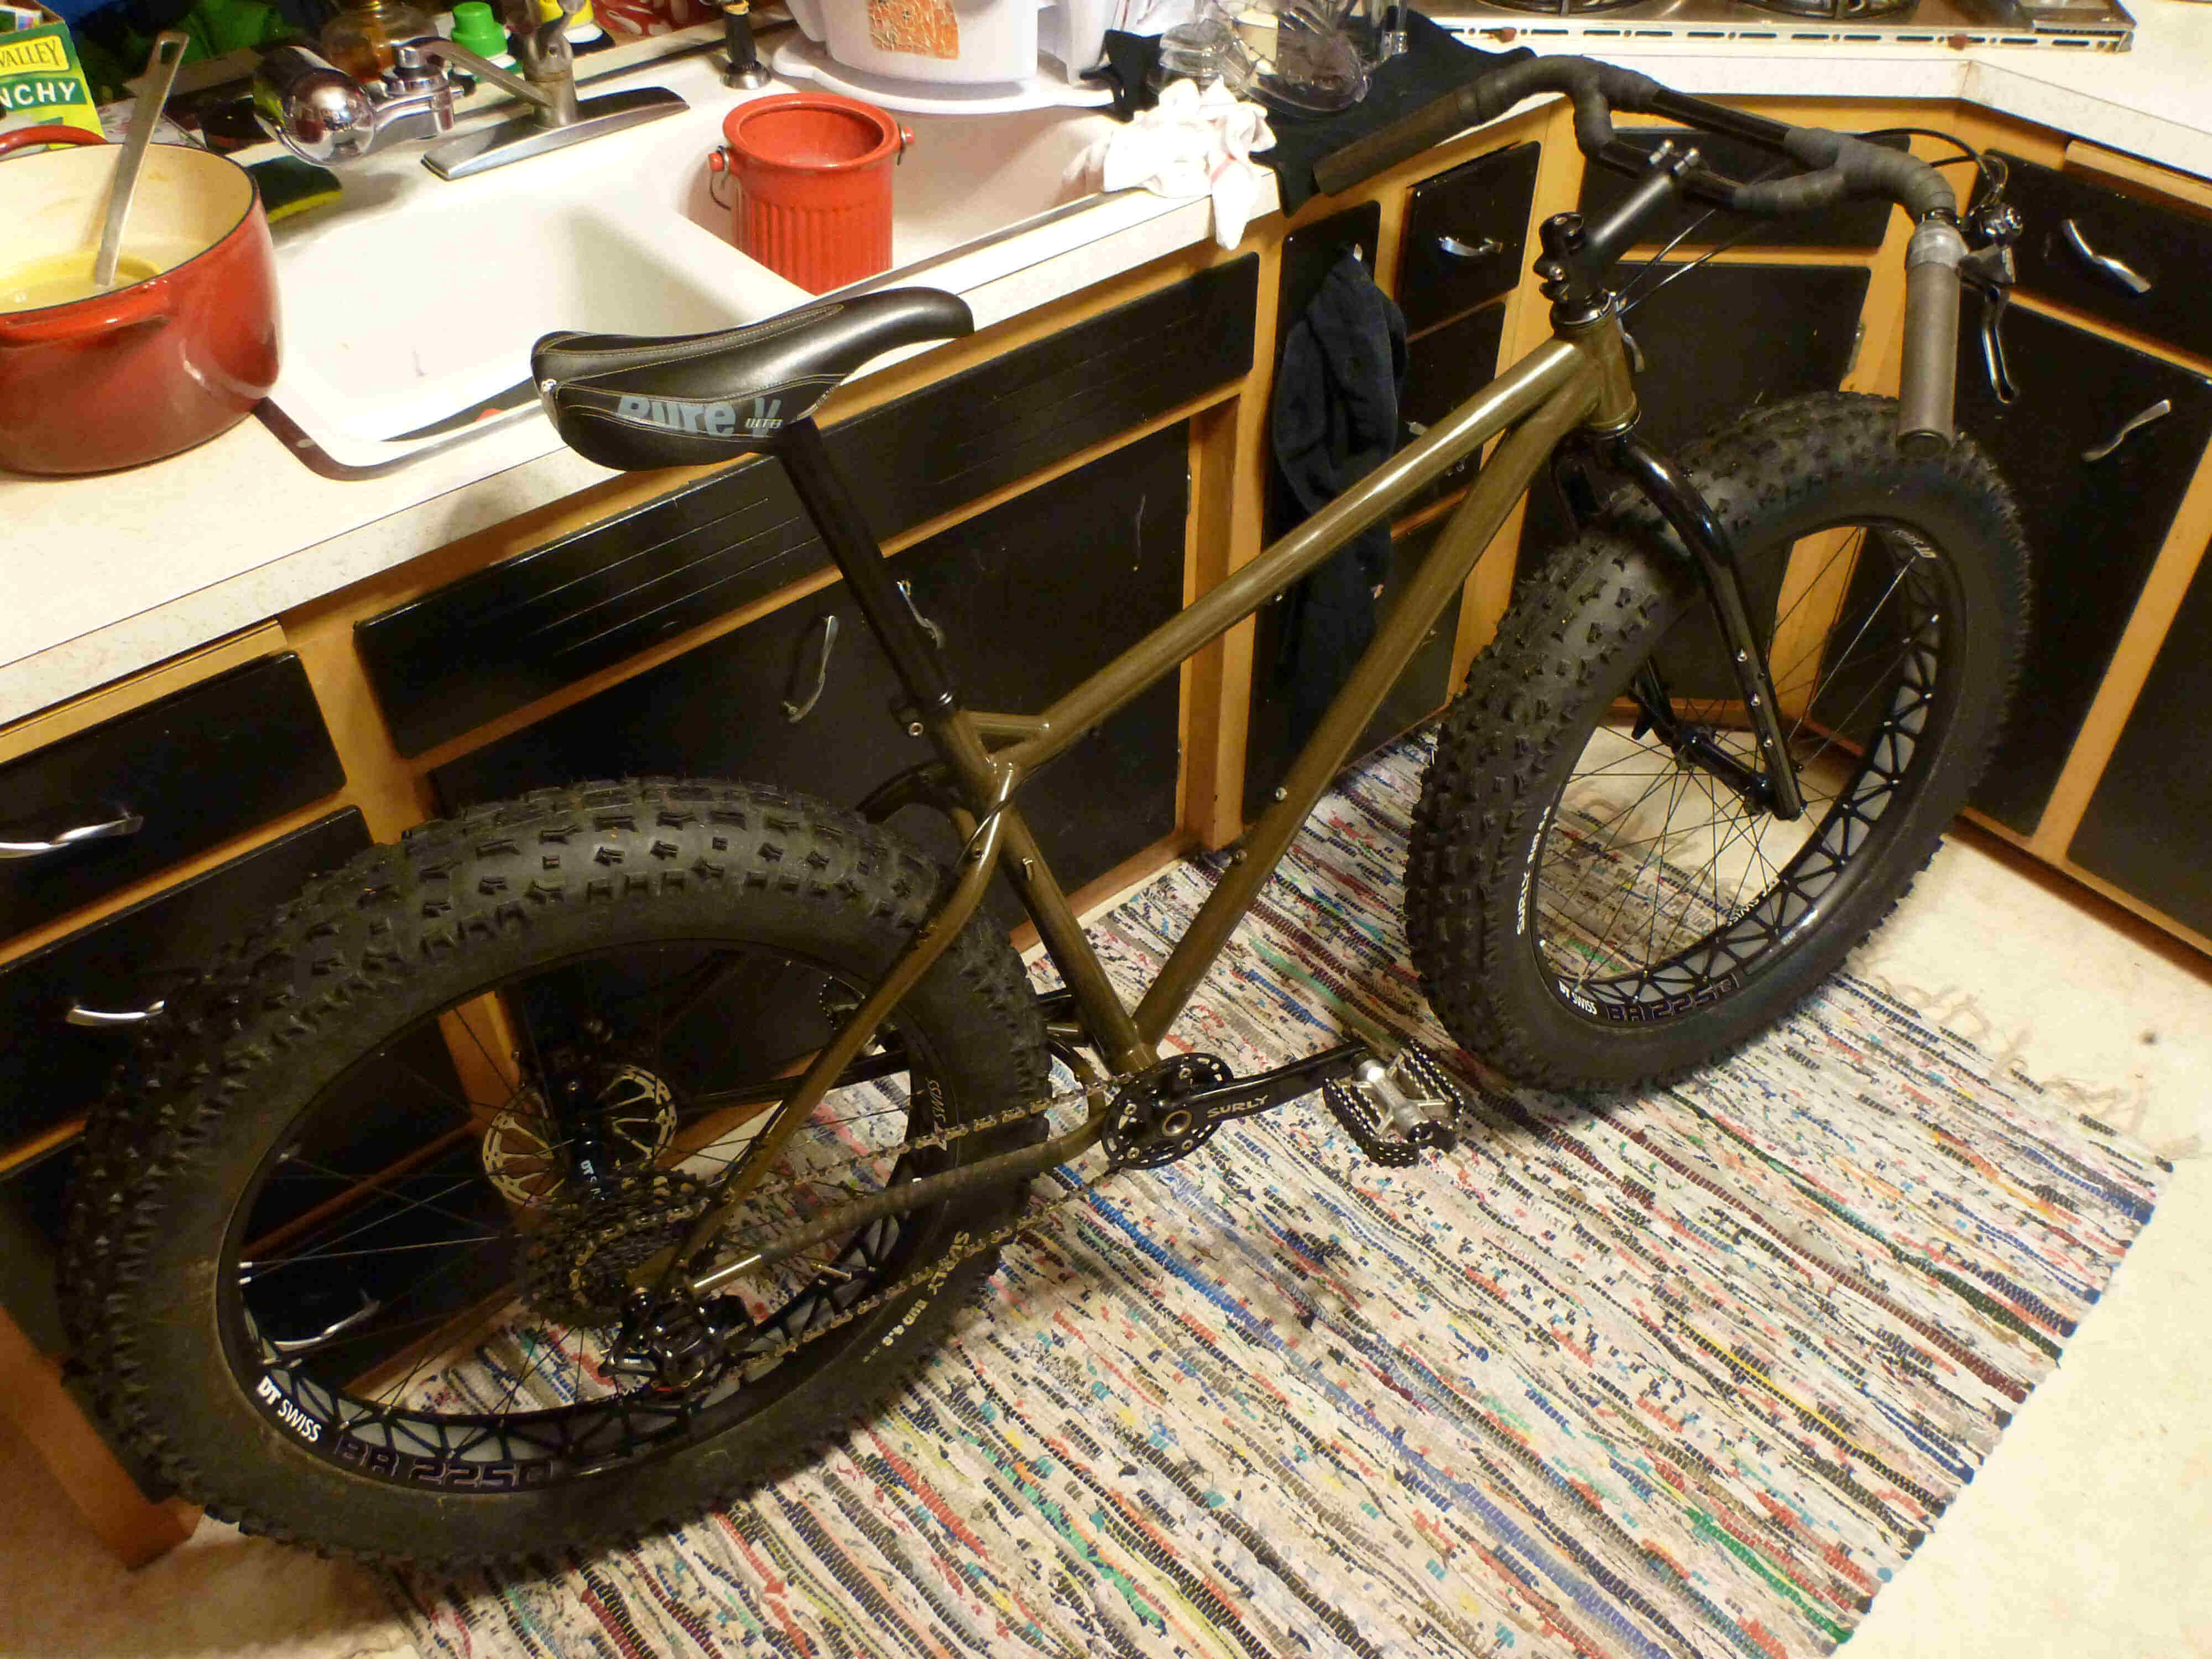 Downward, right side view of an olive drab Surly Ice Cream Truck fat bike, leaning against cabinets in a kitchen